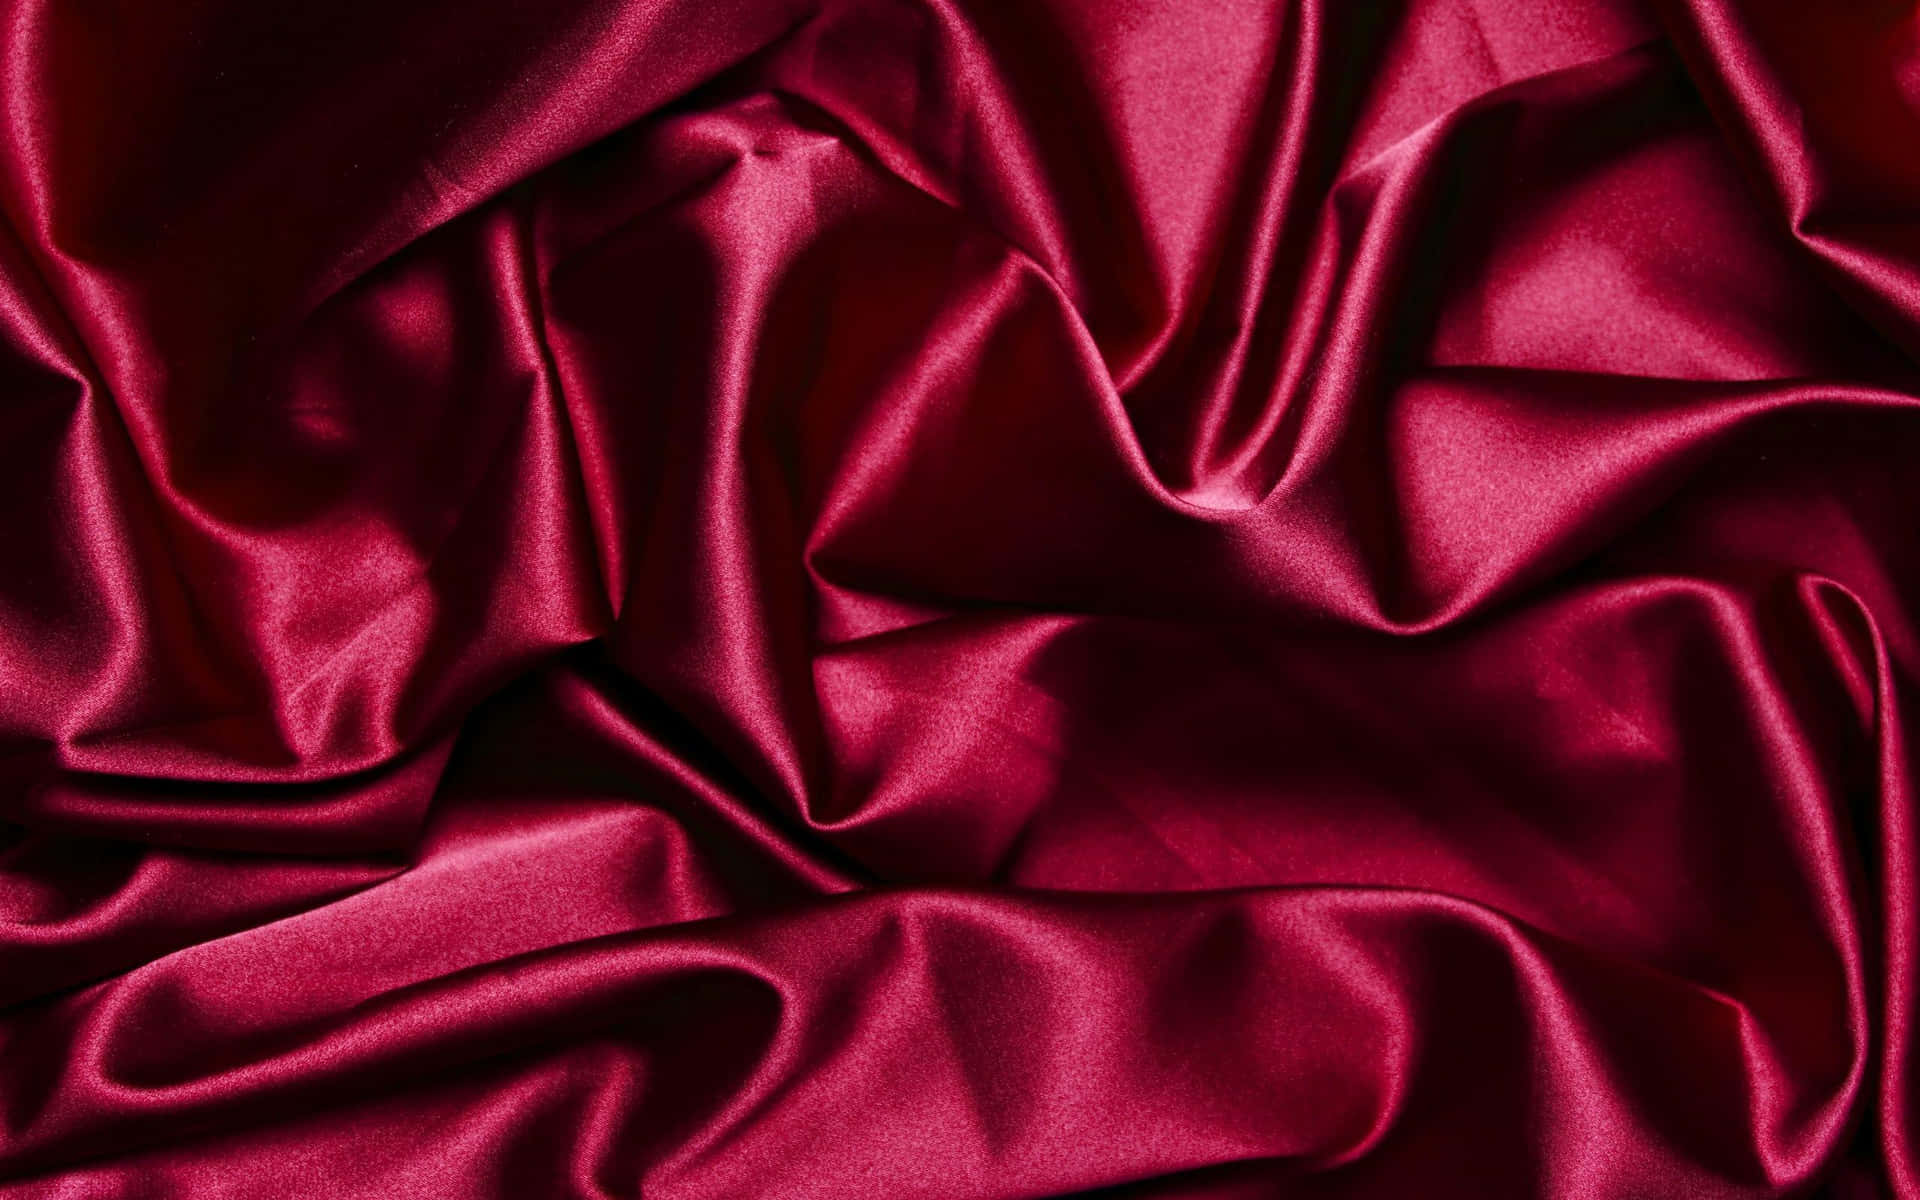 A Red Satin Fabric With A Smooth Texture